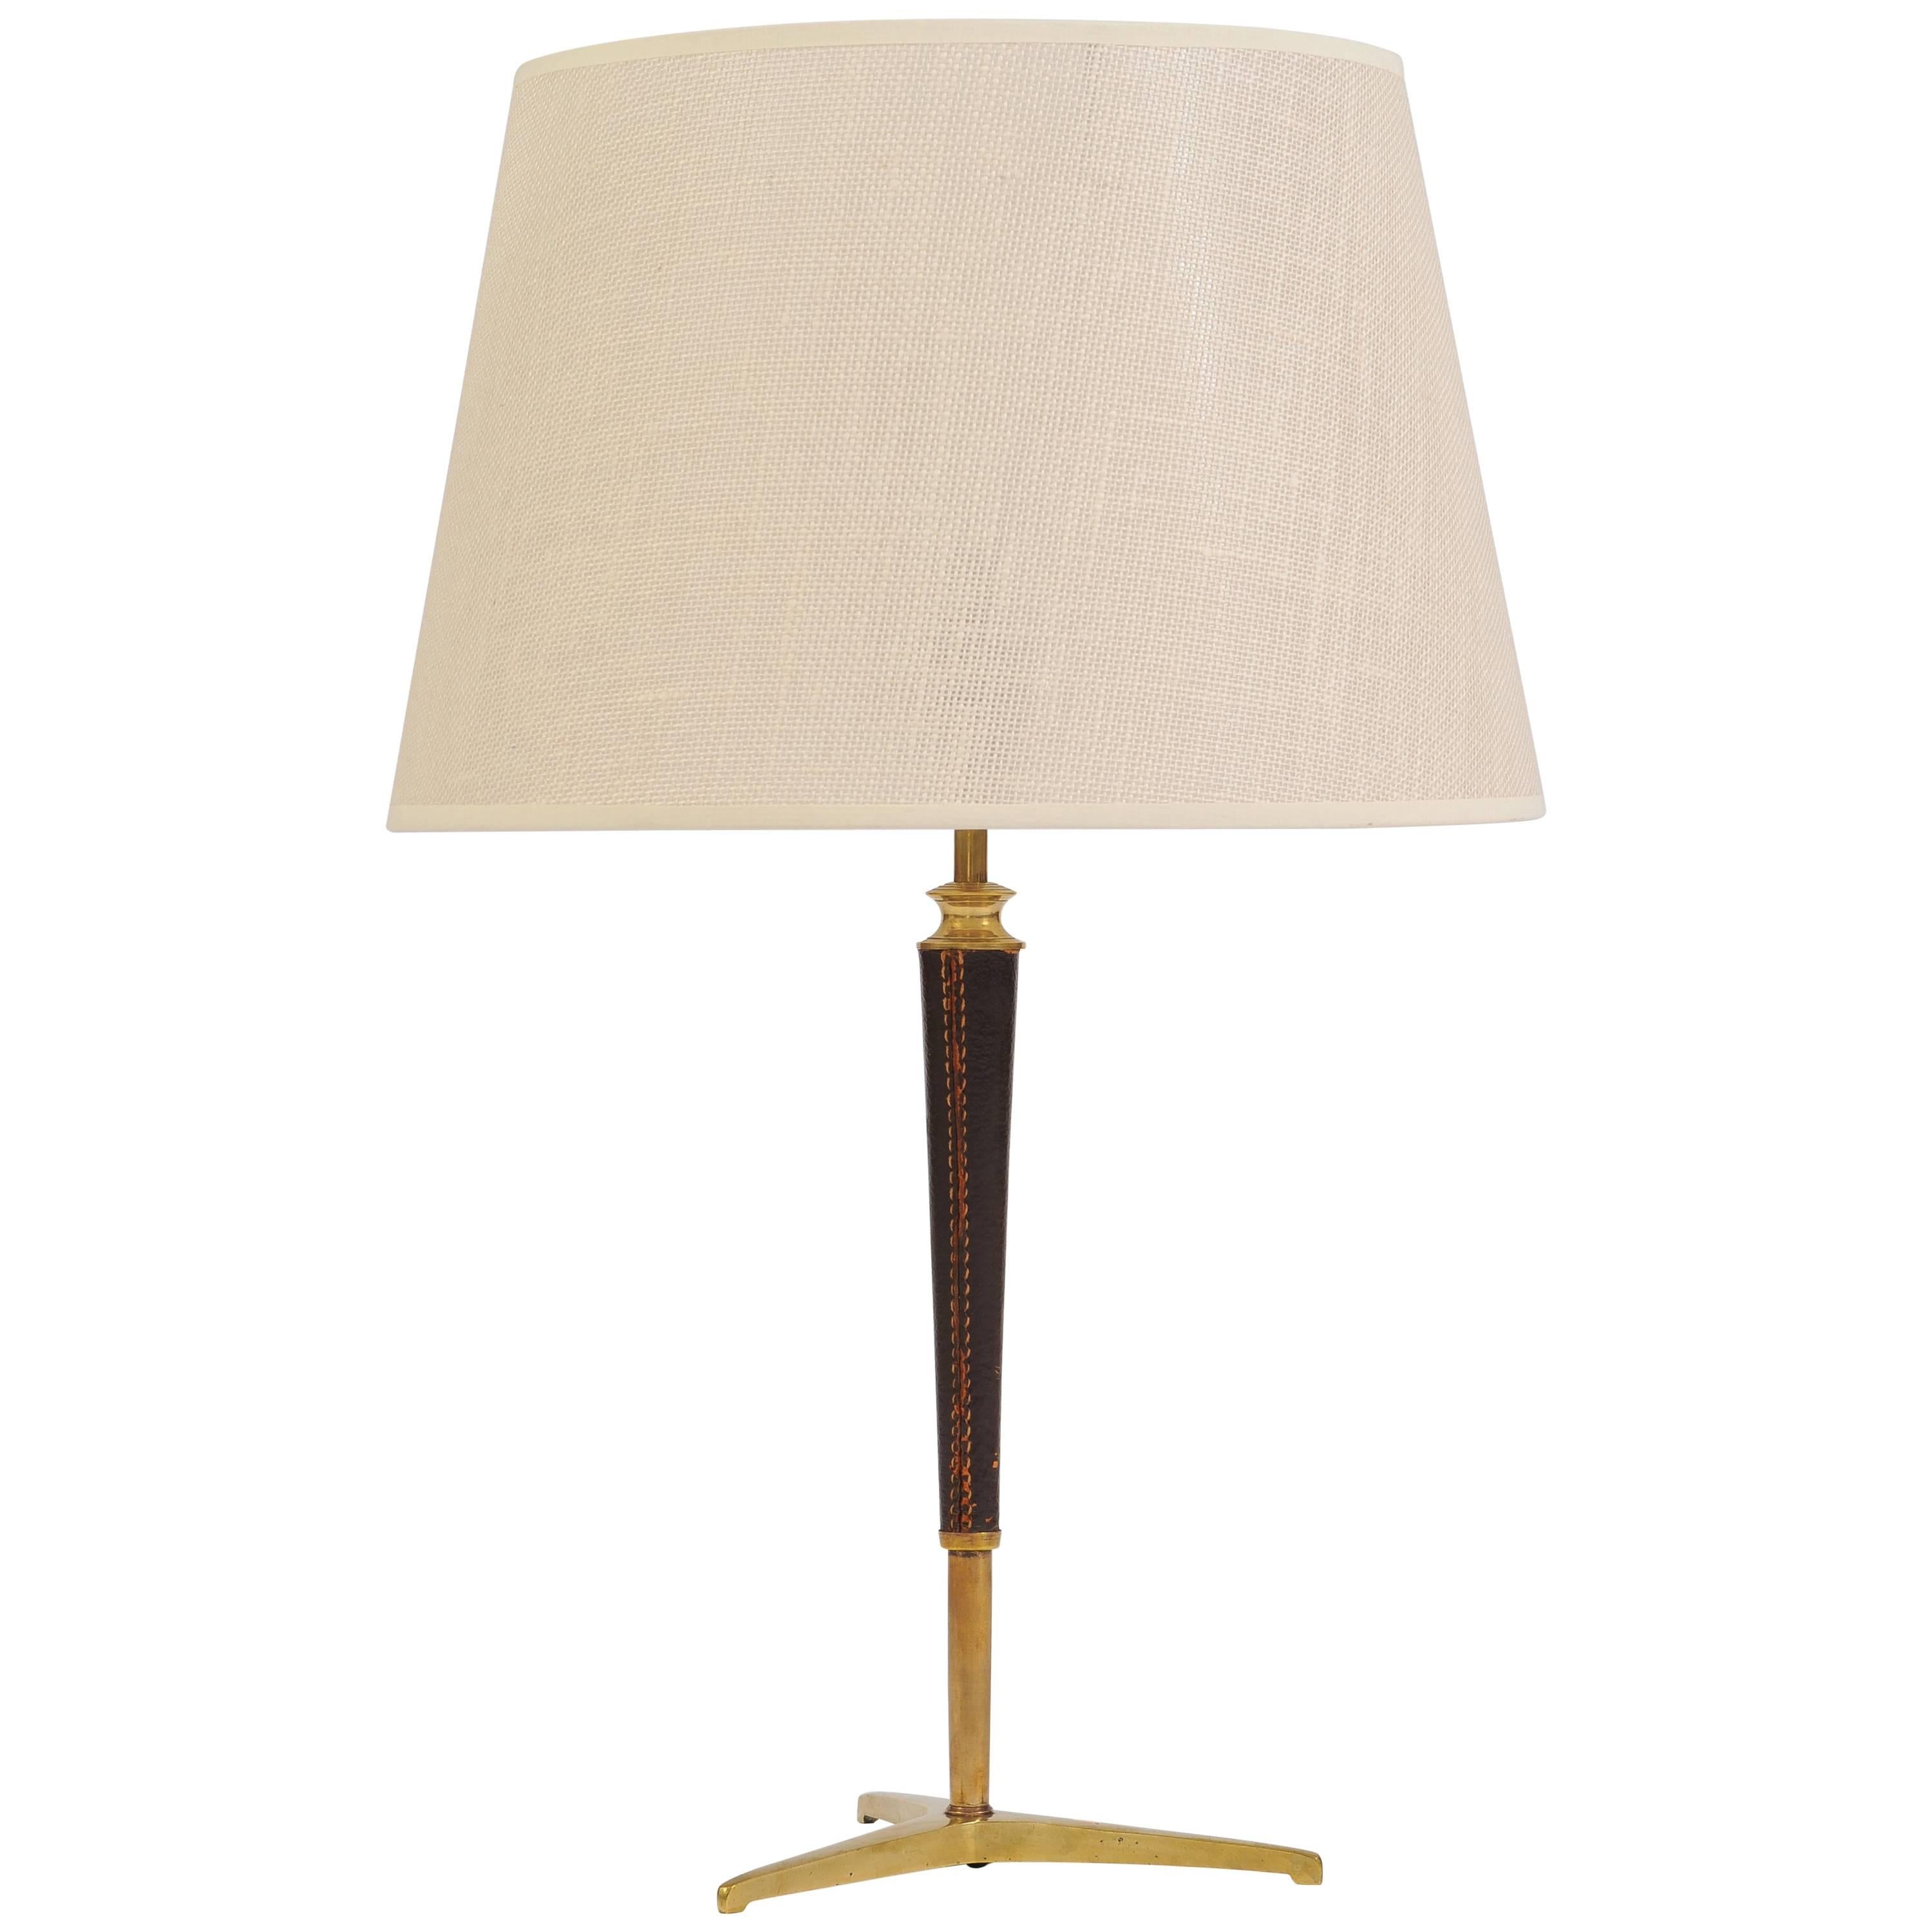 Brass and Stitched Brown Leather Table Lamp, in the Manner of Jacques Adnet